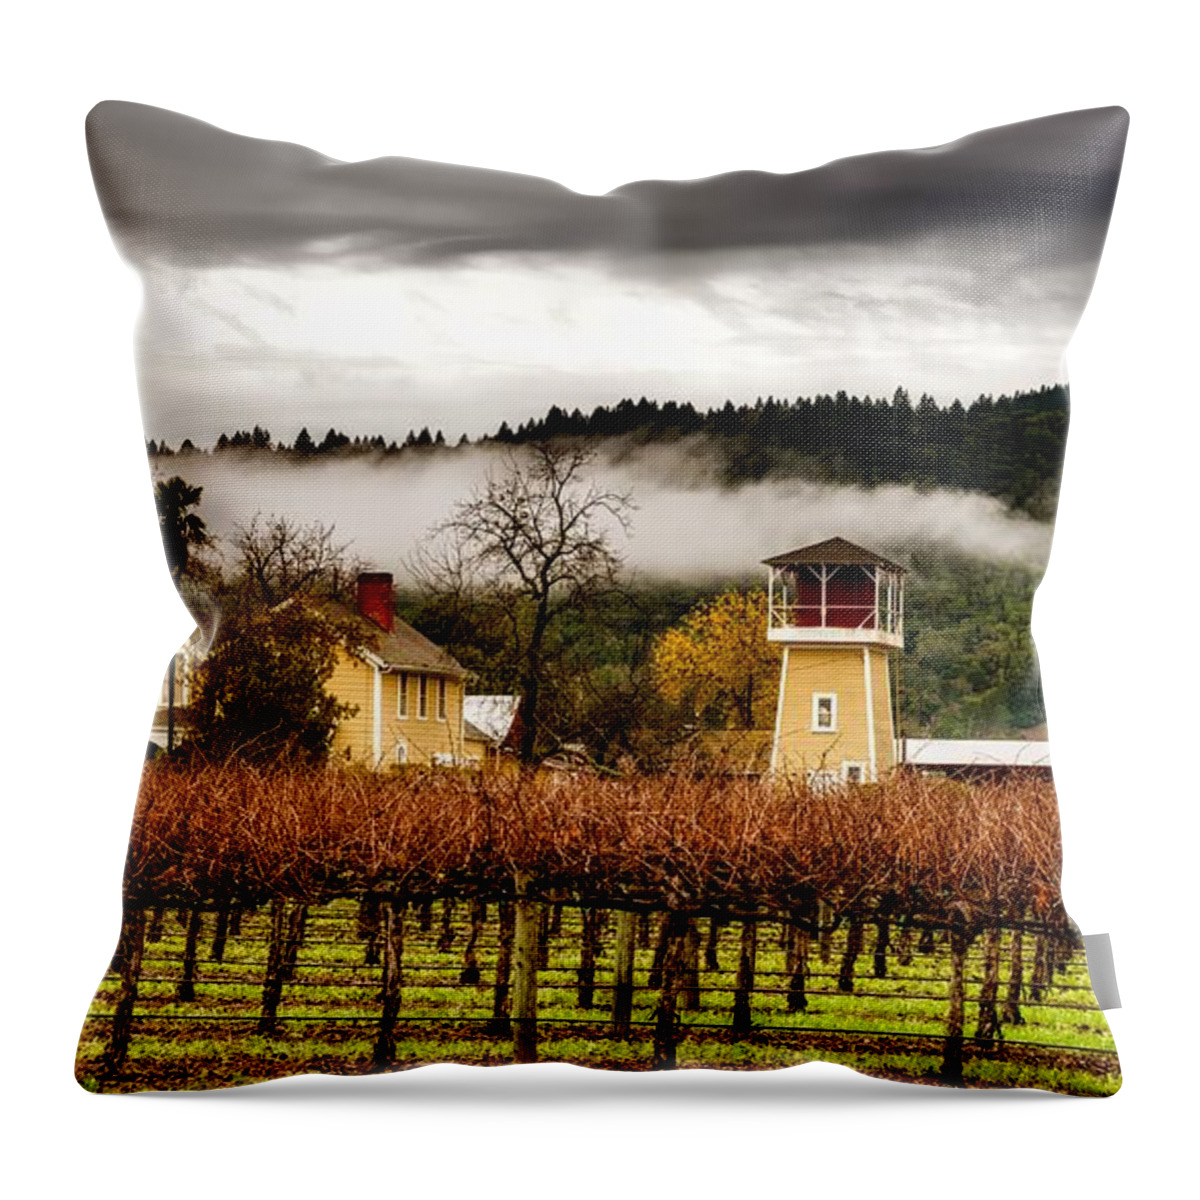 Napa Valley Throw Pillow featuring the photograph Napa Valley Vineyard #12 by Mountain Dreams